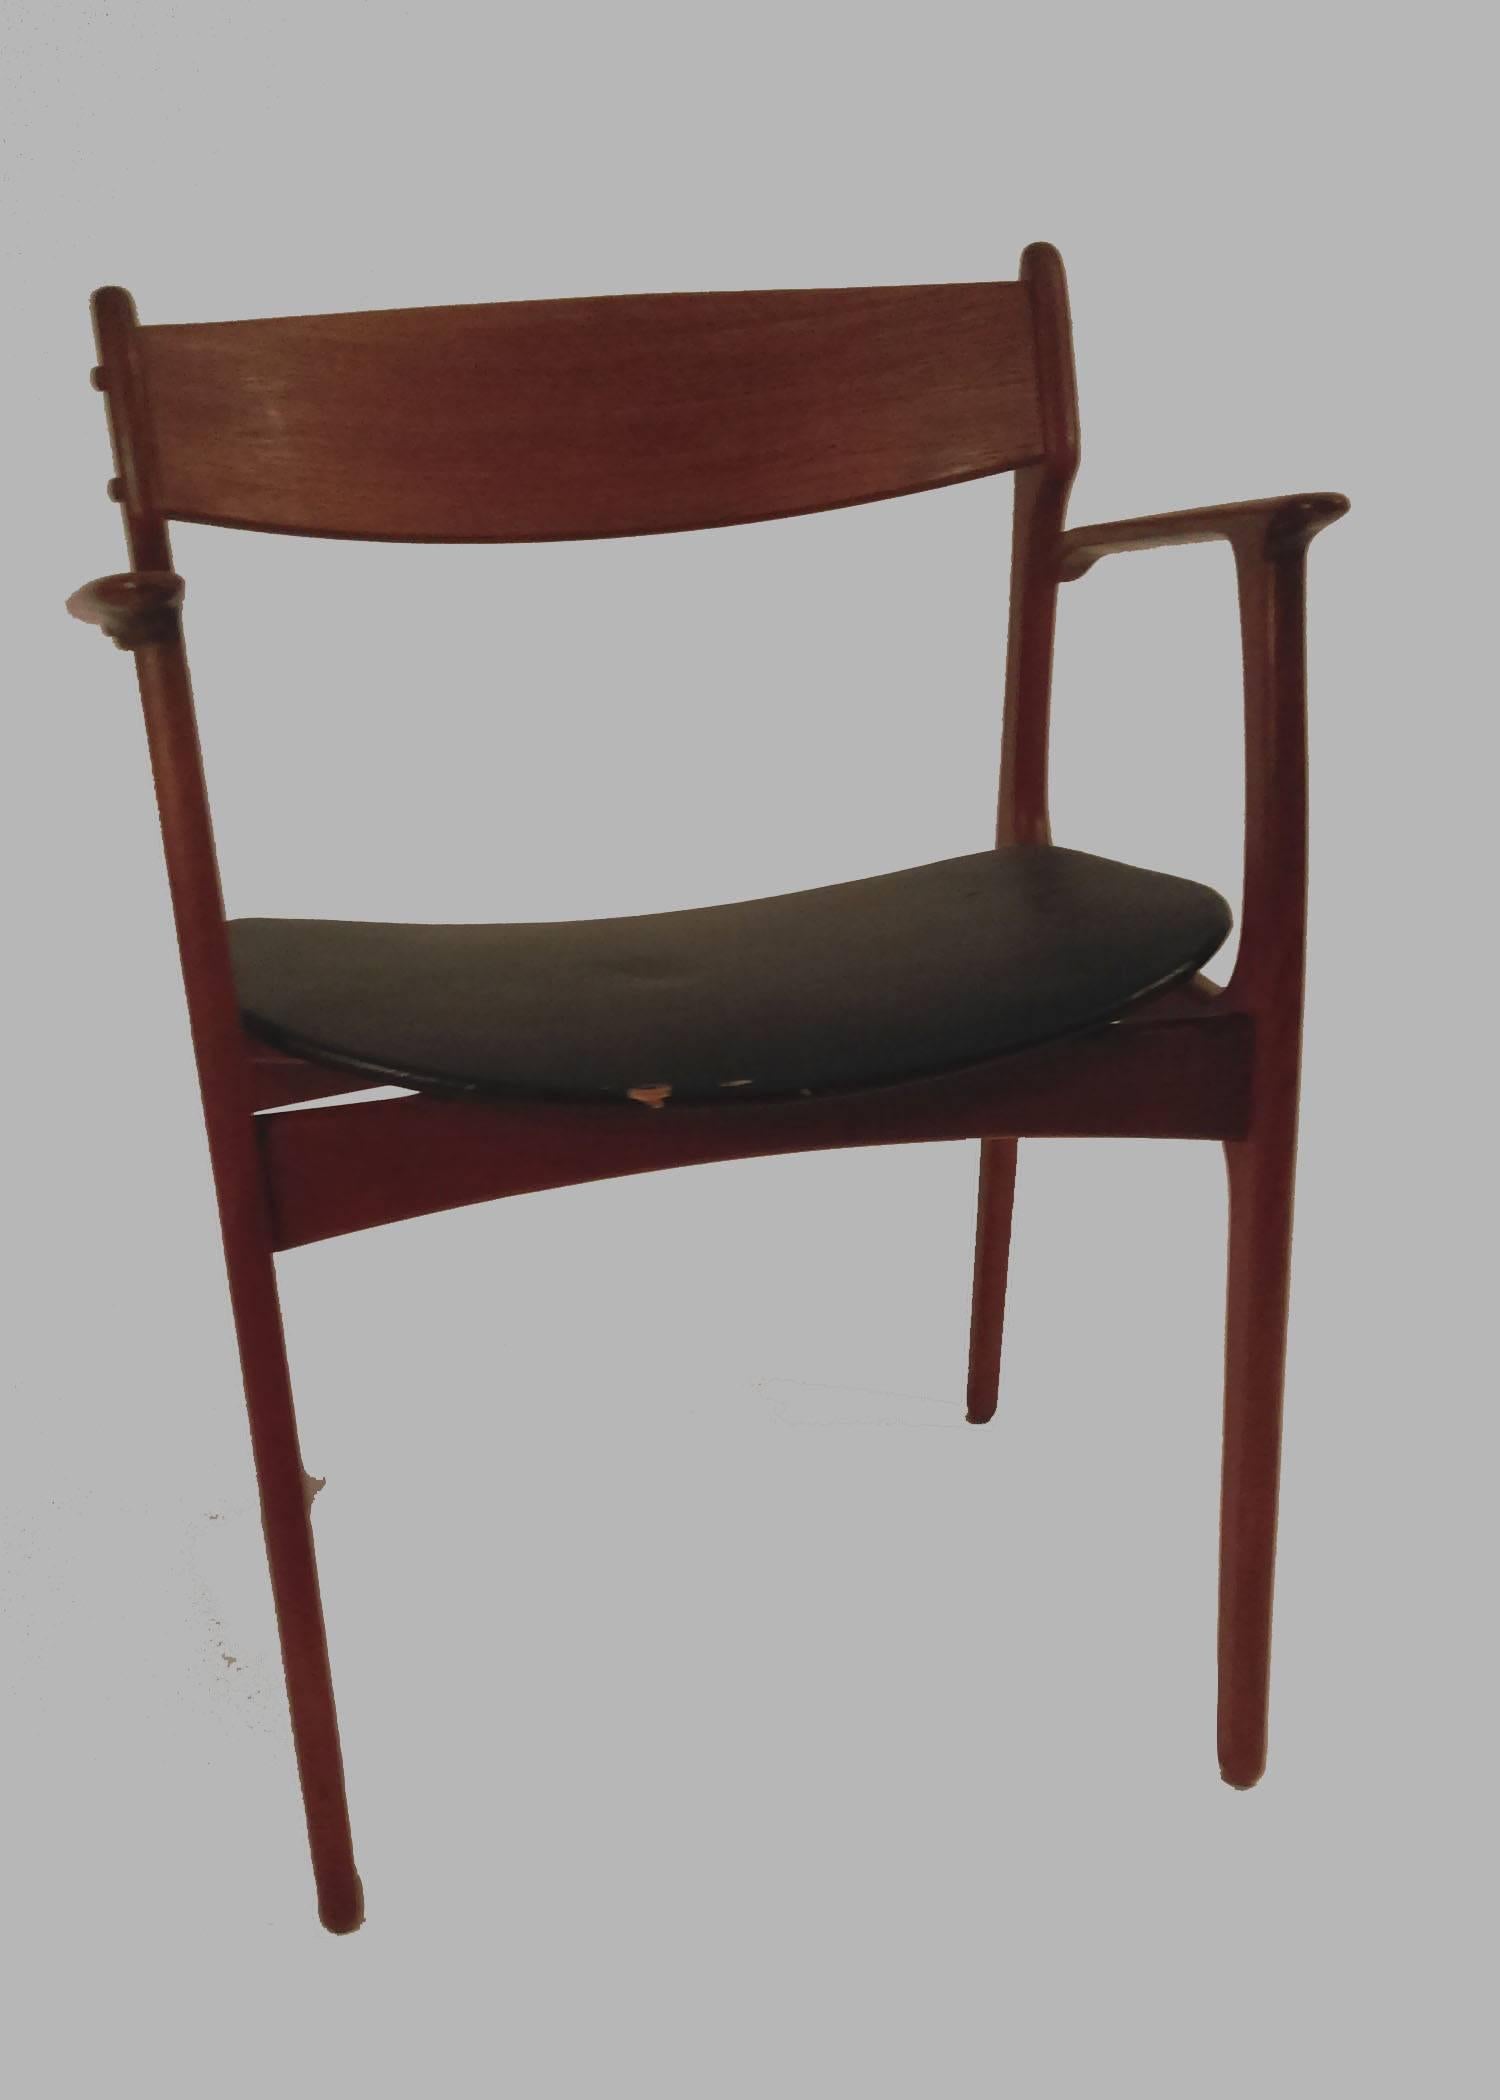 A rarely seen Erik Buch model 50 teak armchair with backrest in teak

The chair has been overlooked and refinished by our cabinetmaker to ensure it´s in very good condition with only minimal signs of age and wear. The chair will be refinished in